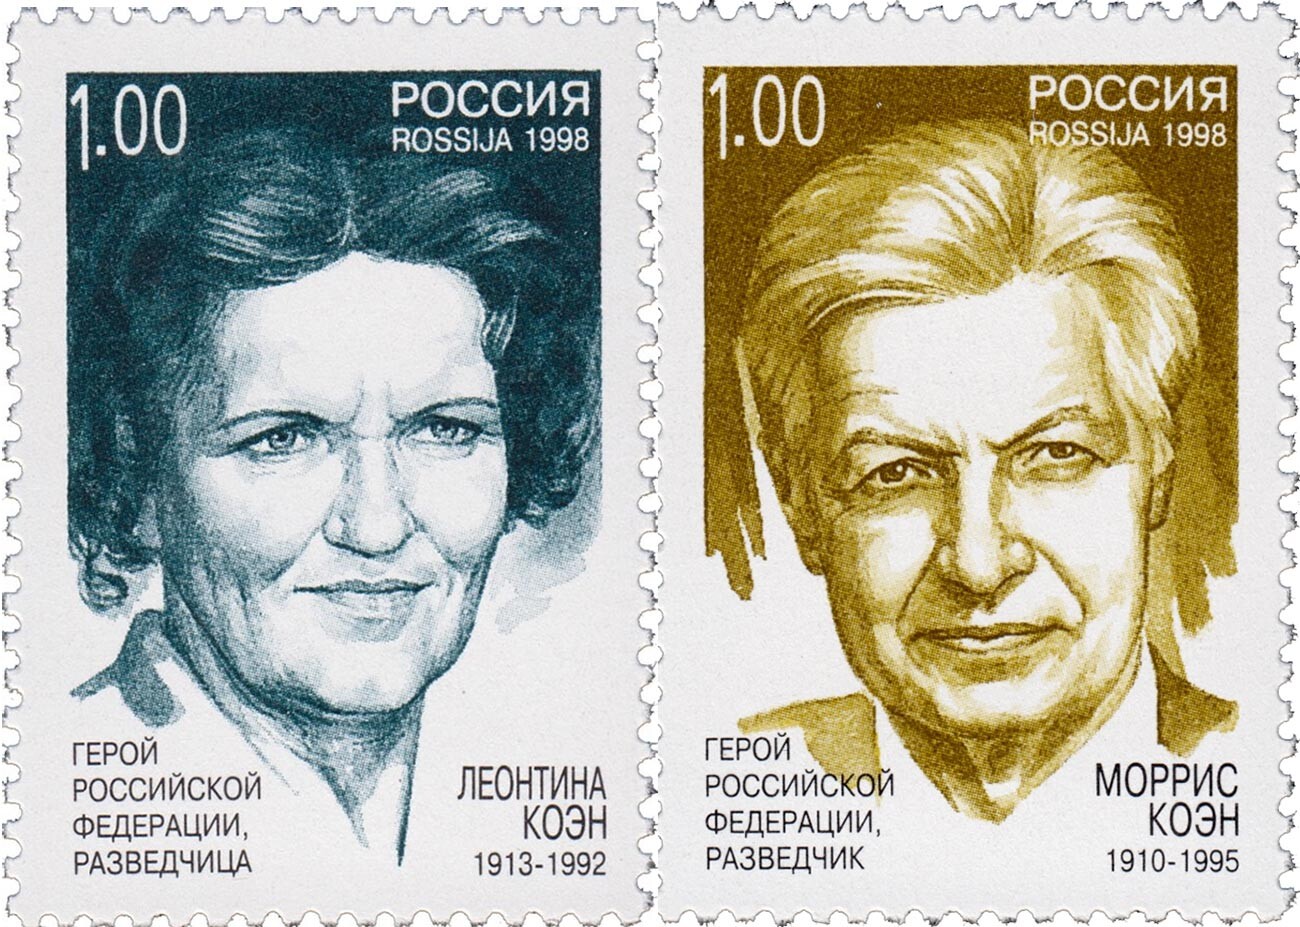 Commemorative stamps with Lona and Morris Cohen.